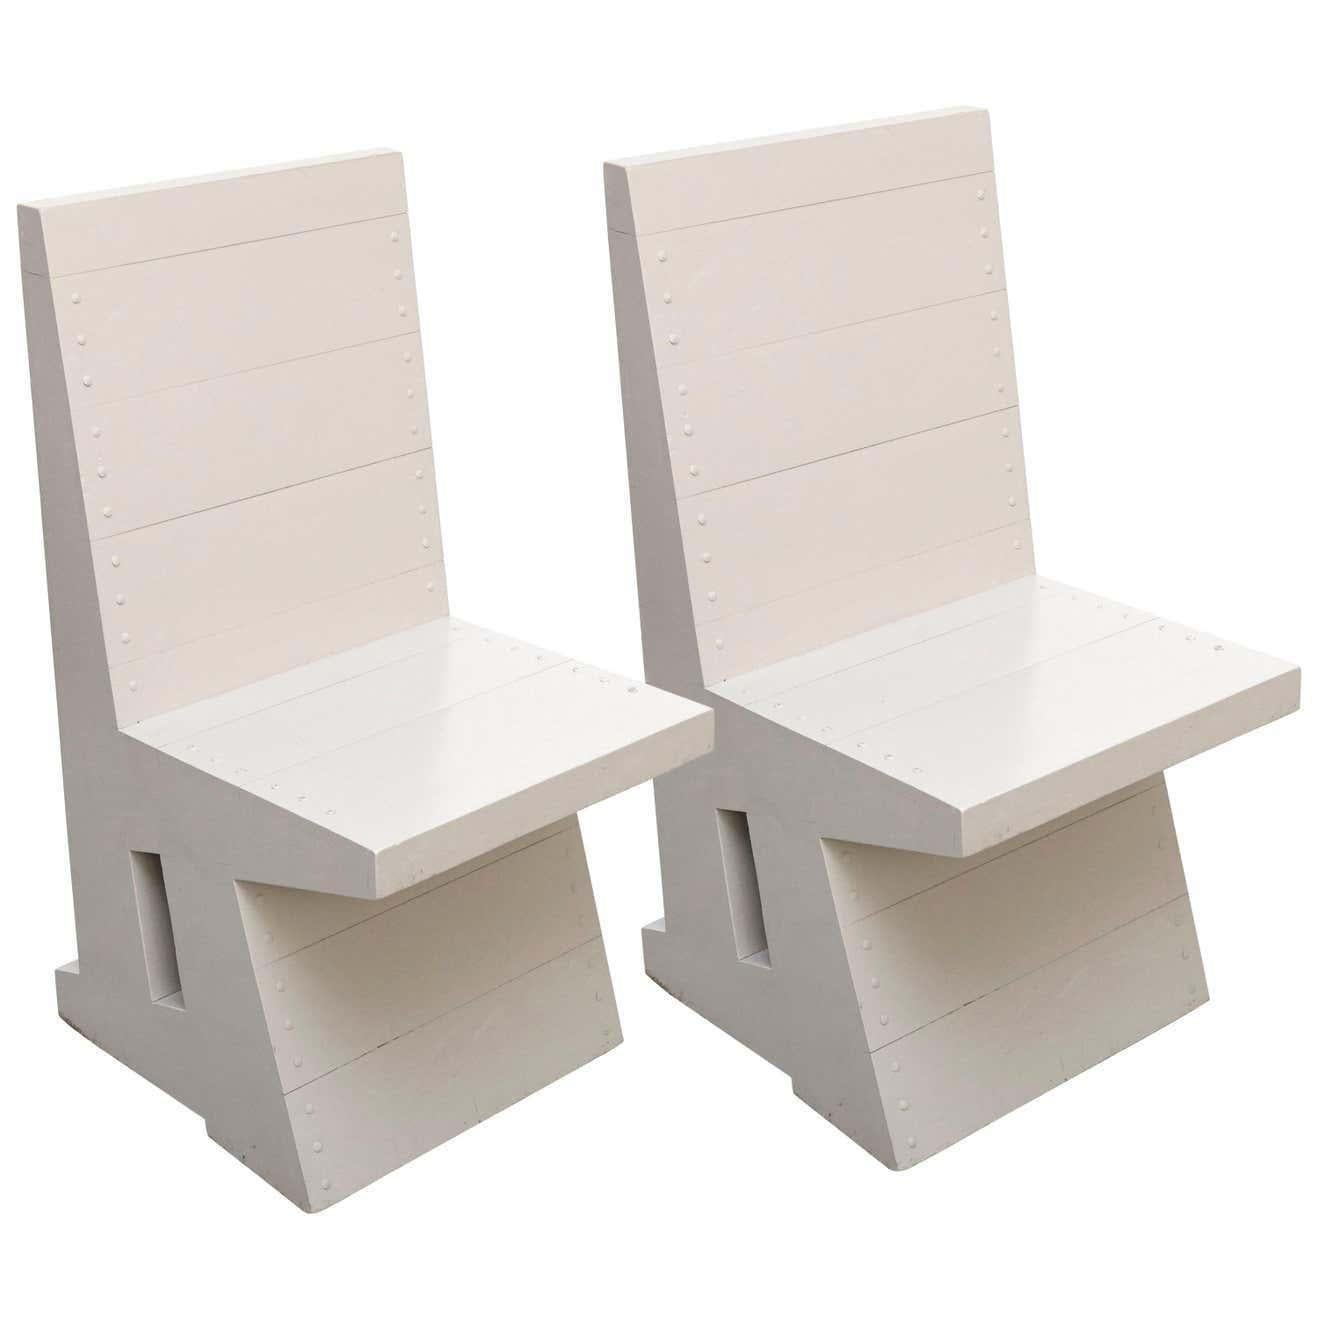 Presenting a remarkable pair of easy chairs designed by the acclaimed architect and designer Dom Hans van der Laan for the Abbey Church of St. Benedictusberg in Vaals, Netherlands. This pair, manufactured circa 1980, showcases the timeless design